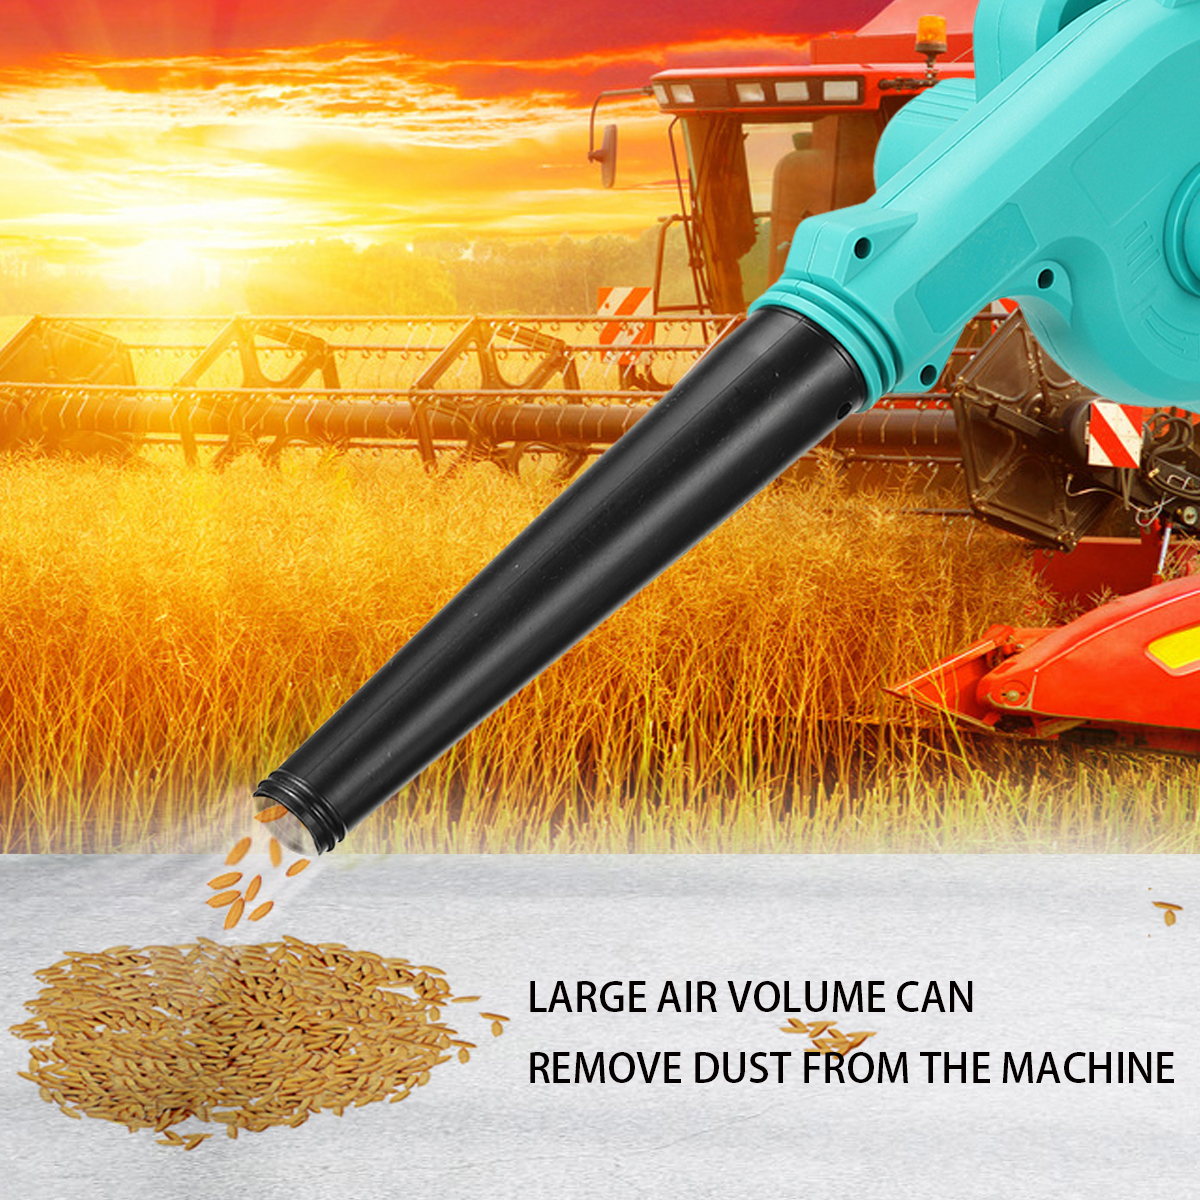 1800W-Portable-Cordless-Car-Washer-High-Pressure-Car-Household-Washer-Cleaner-Guns-Pumps-Tools-Fit-M-1912132-13